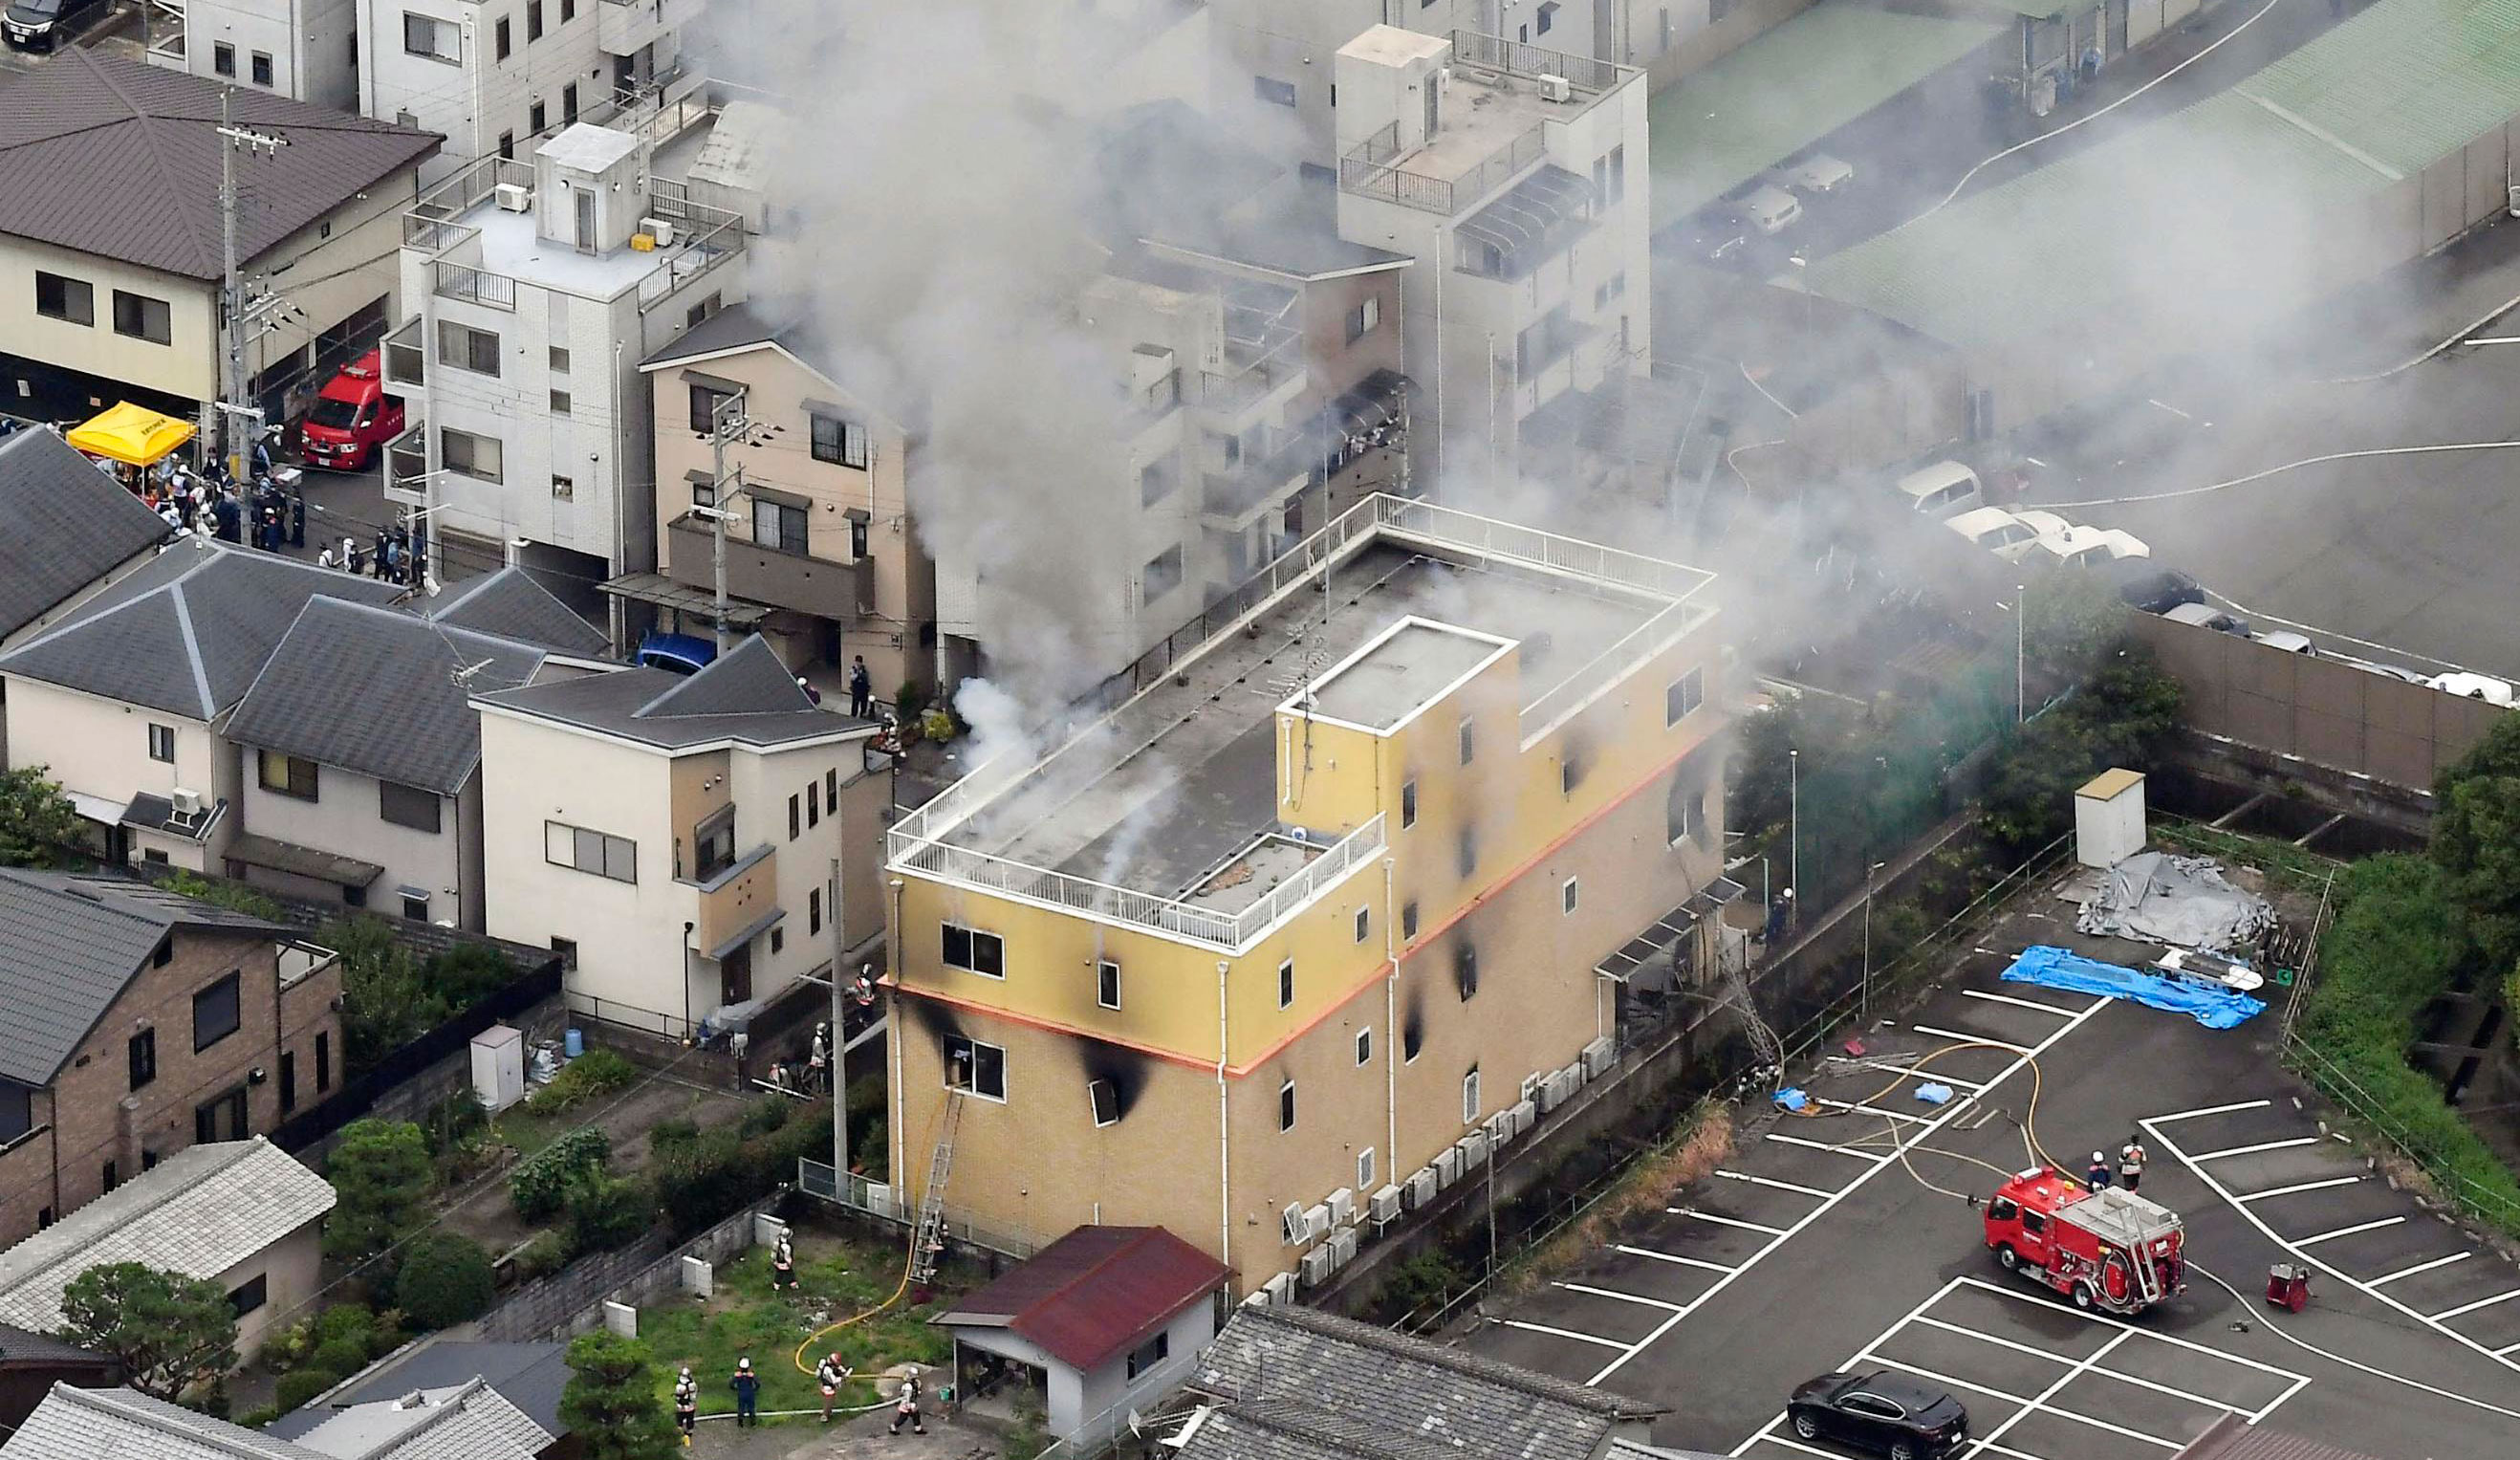 Firefighters battle fires at the animation studio in Kyoto on Thursday after a man doused the building with what appeared to be petrol. 